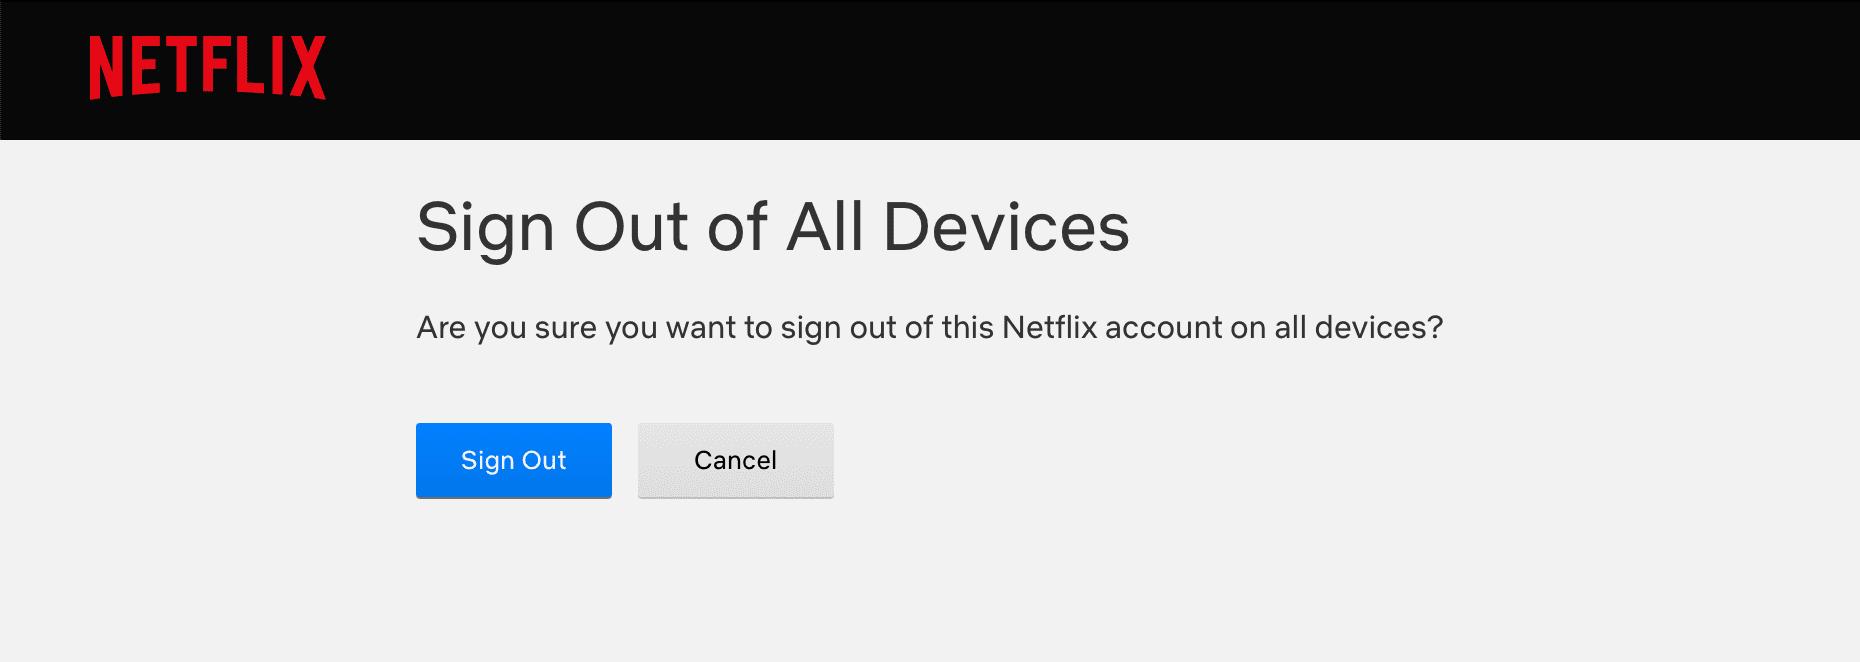 Confirm you want to sign out of this Netflix account on all devices